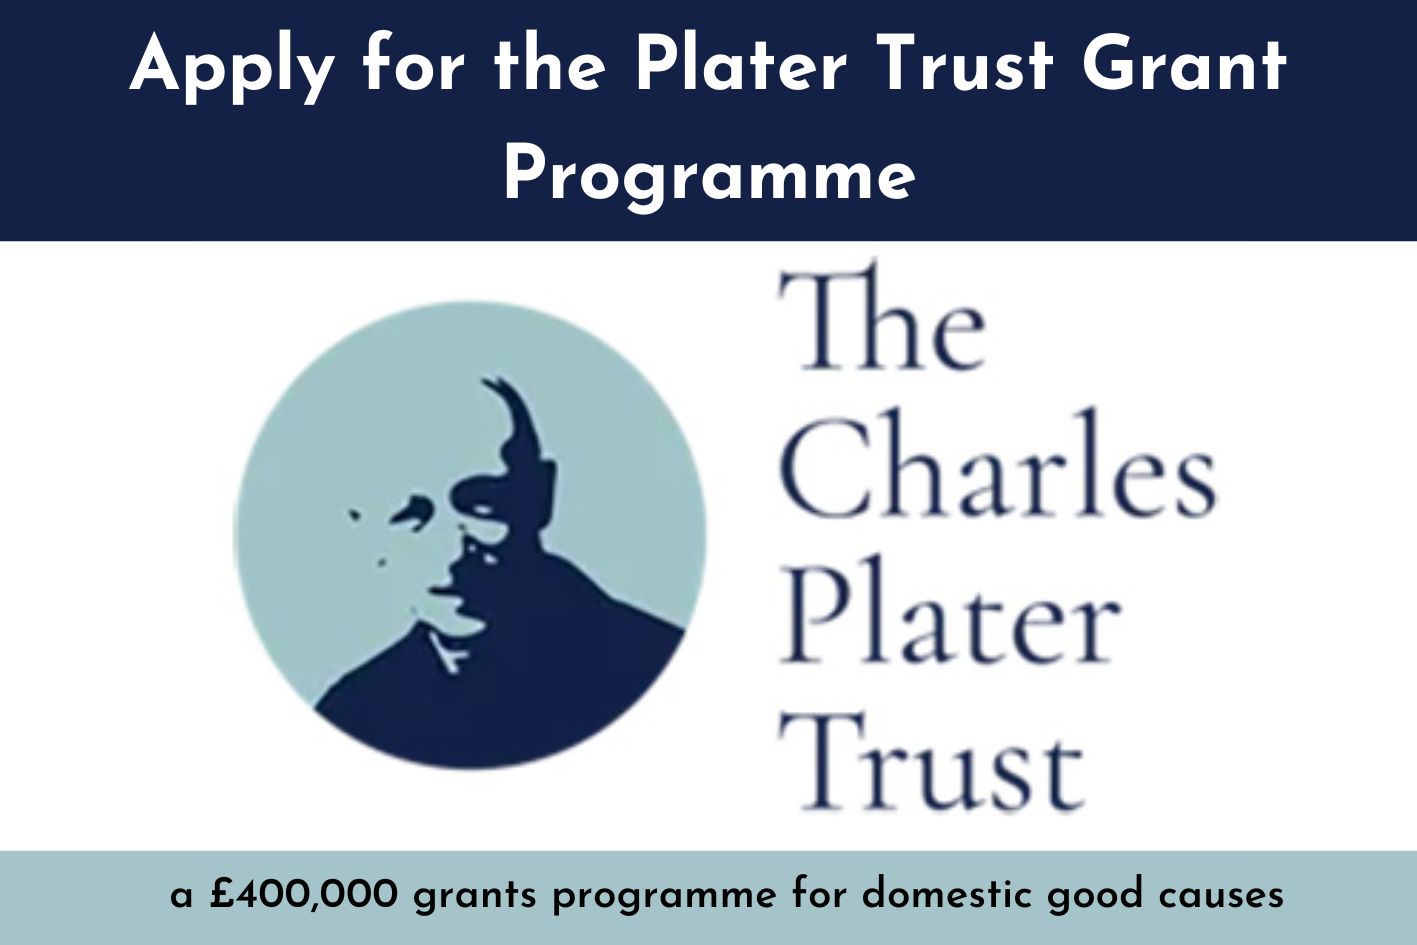 Apply for the Plater Trust Grant Programme